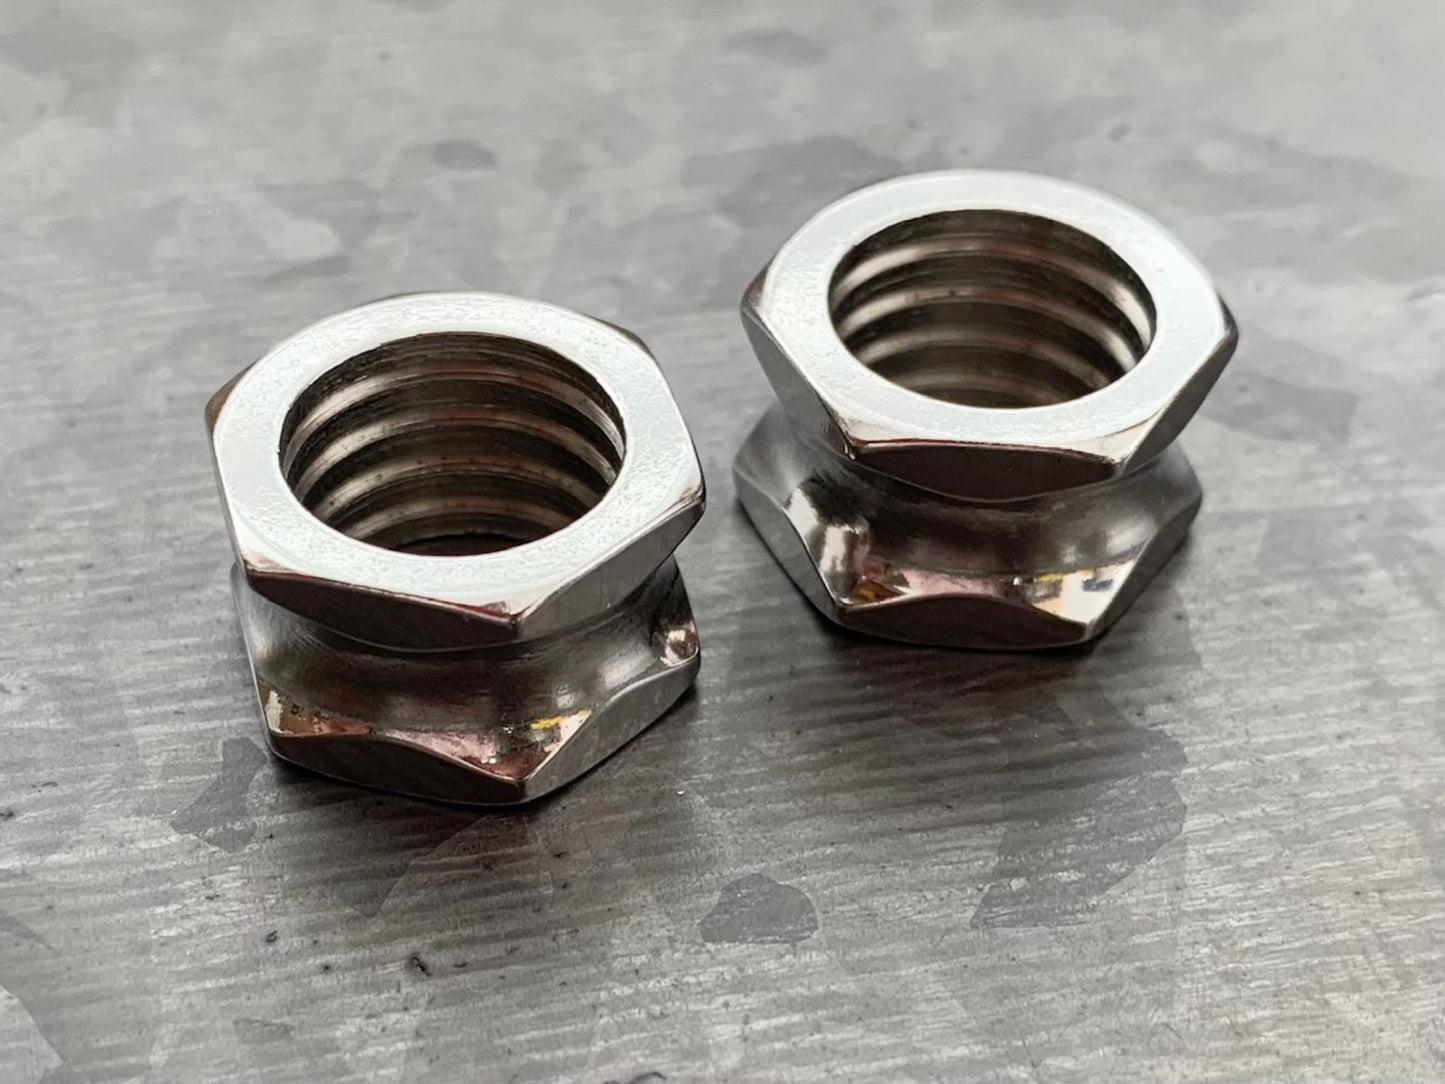 PAIR of Stunning 316L Surgical Steel Hexagon Bolt Double Flare Tunnels - Gauges 2g (6mm) thru 5/8" (16mm) available!